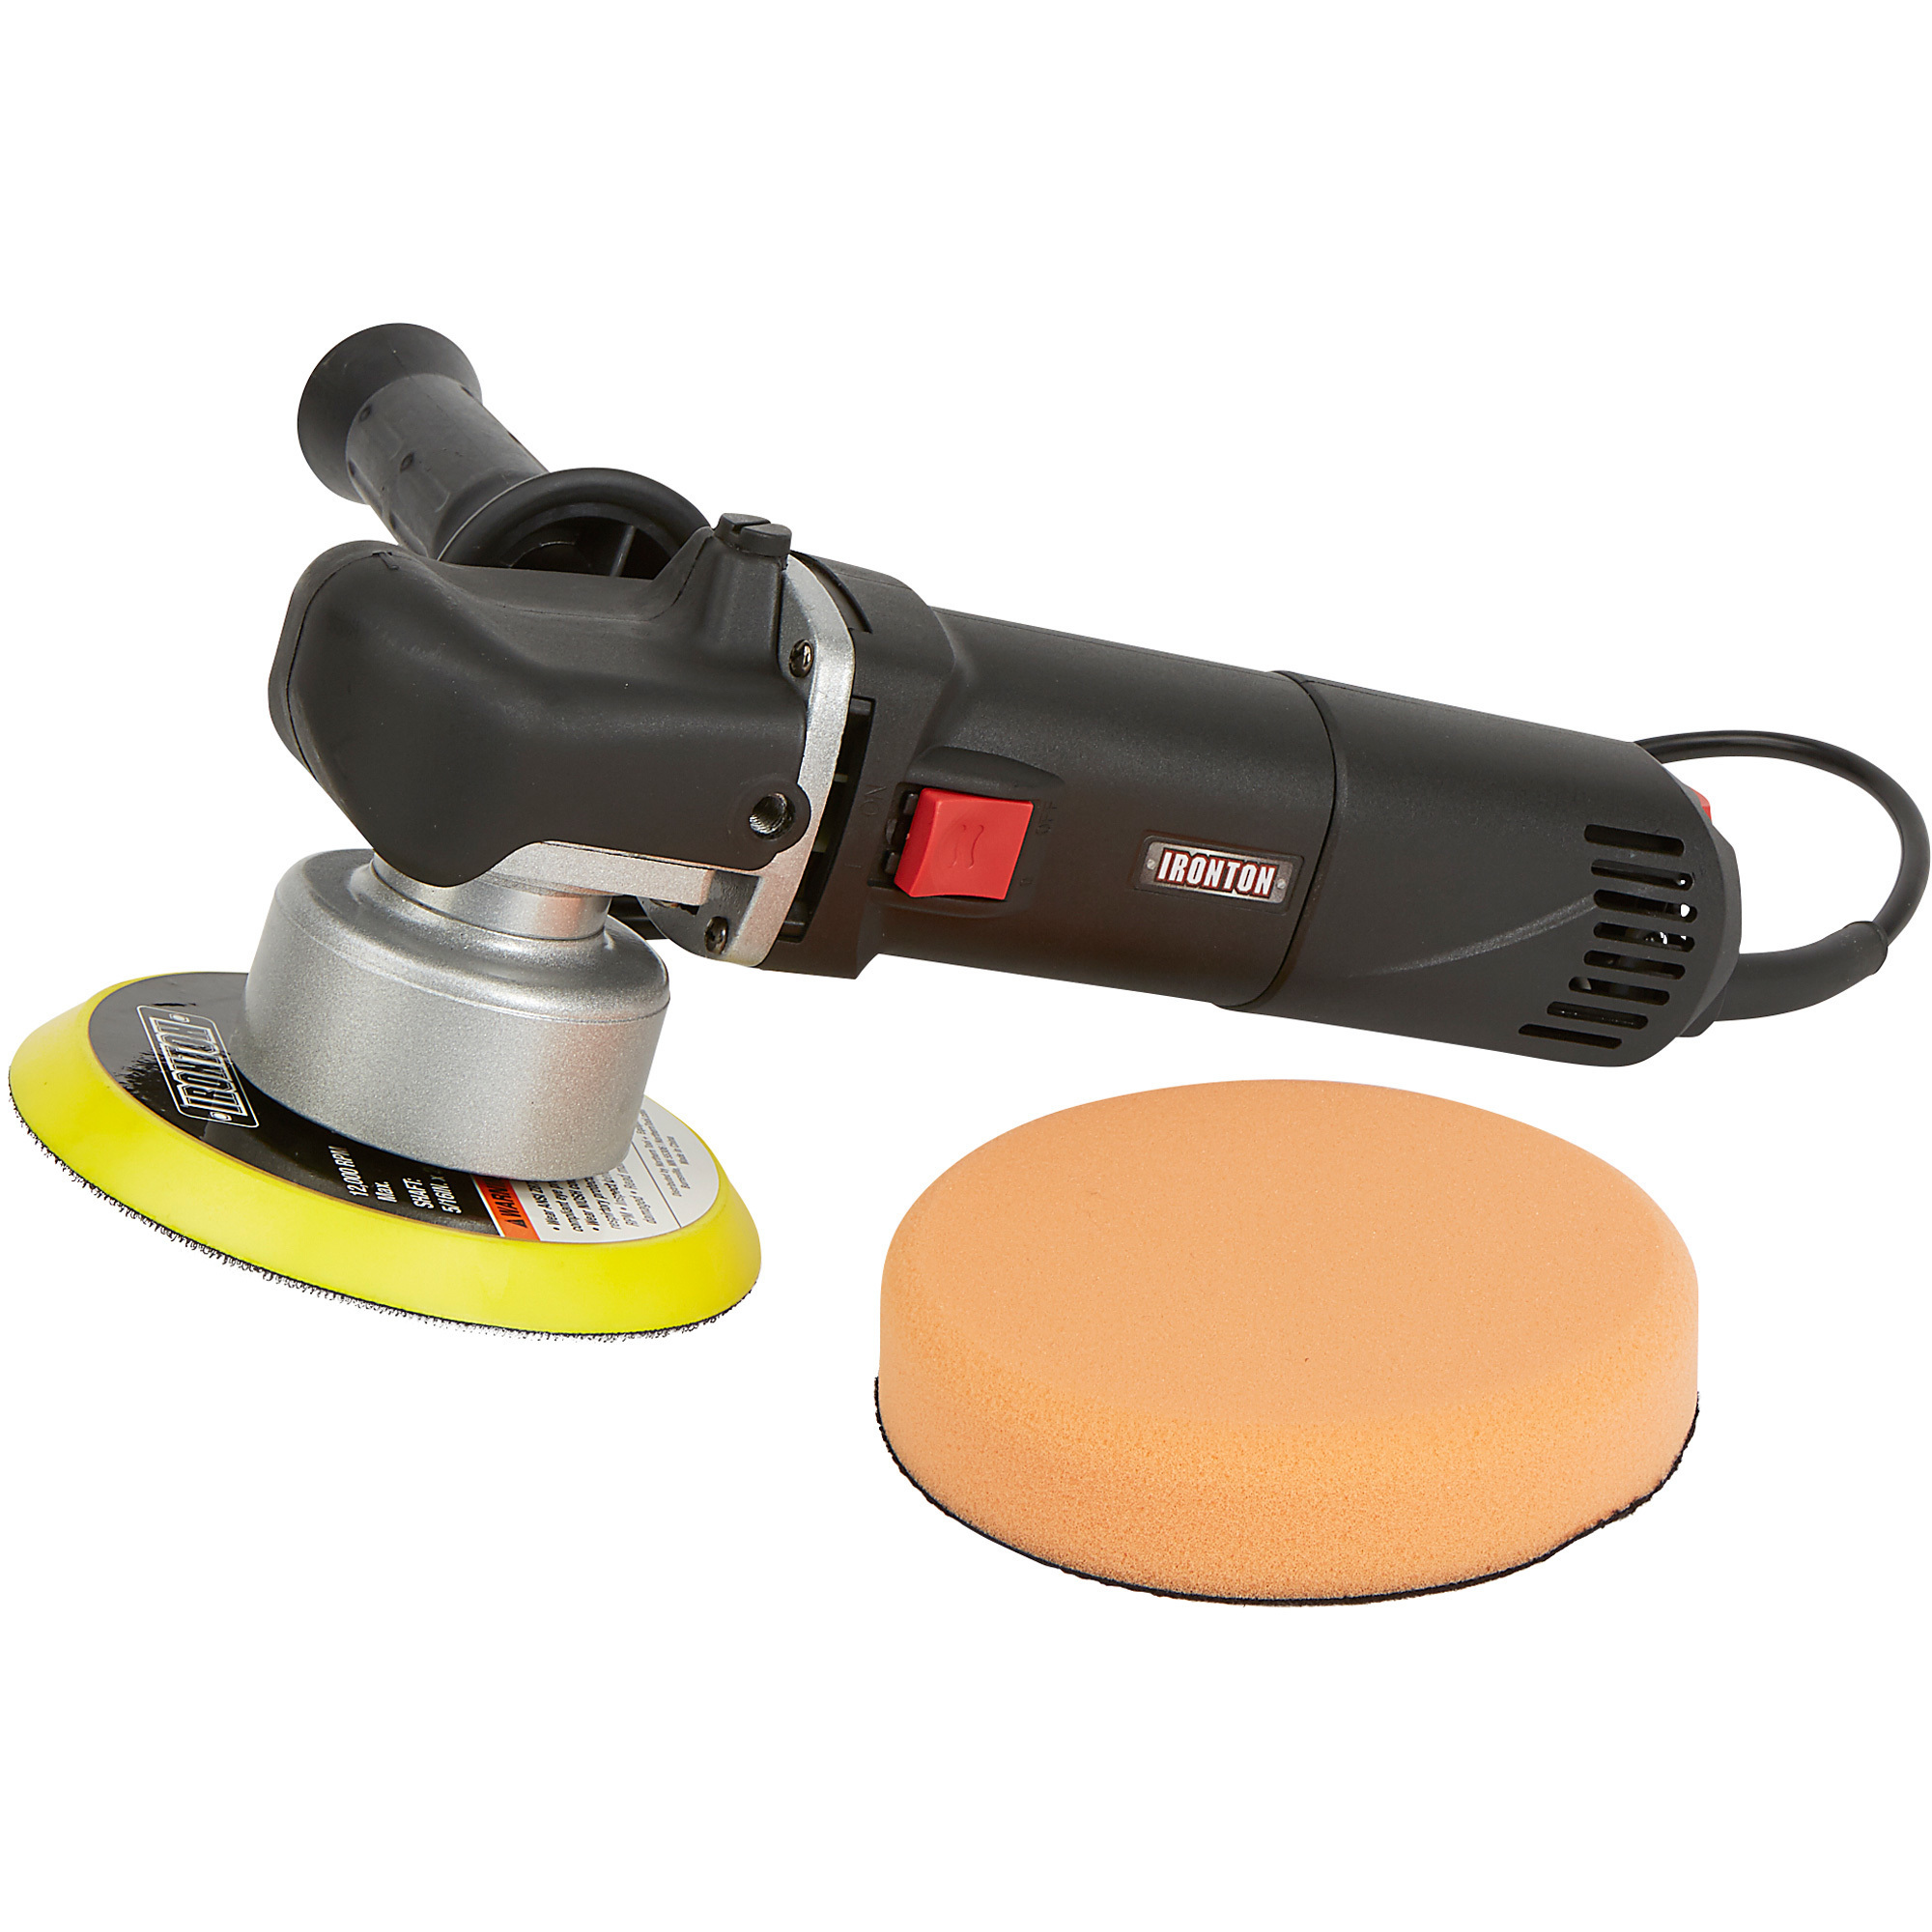 Ironton Dual Action Car Polisher — 5.7 Amp, 6in. Pad